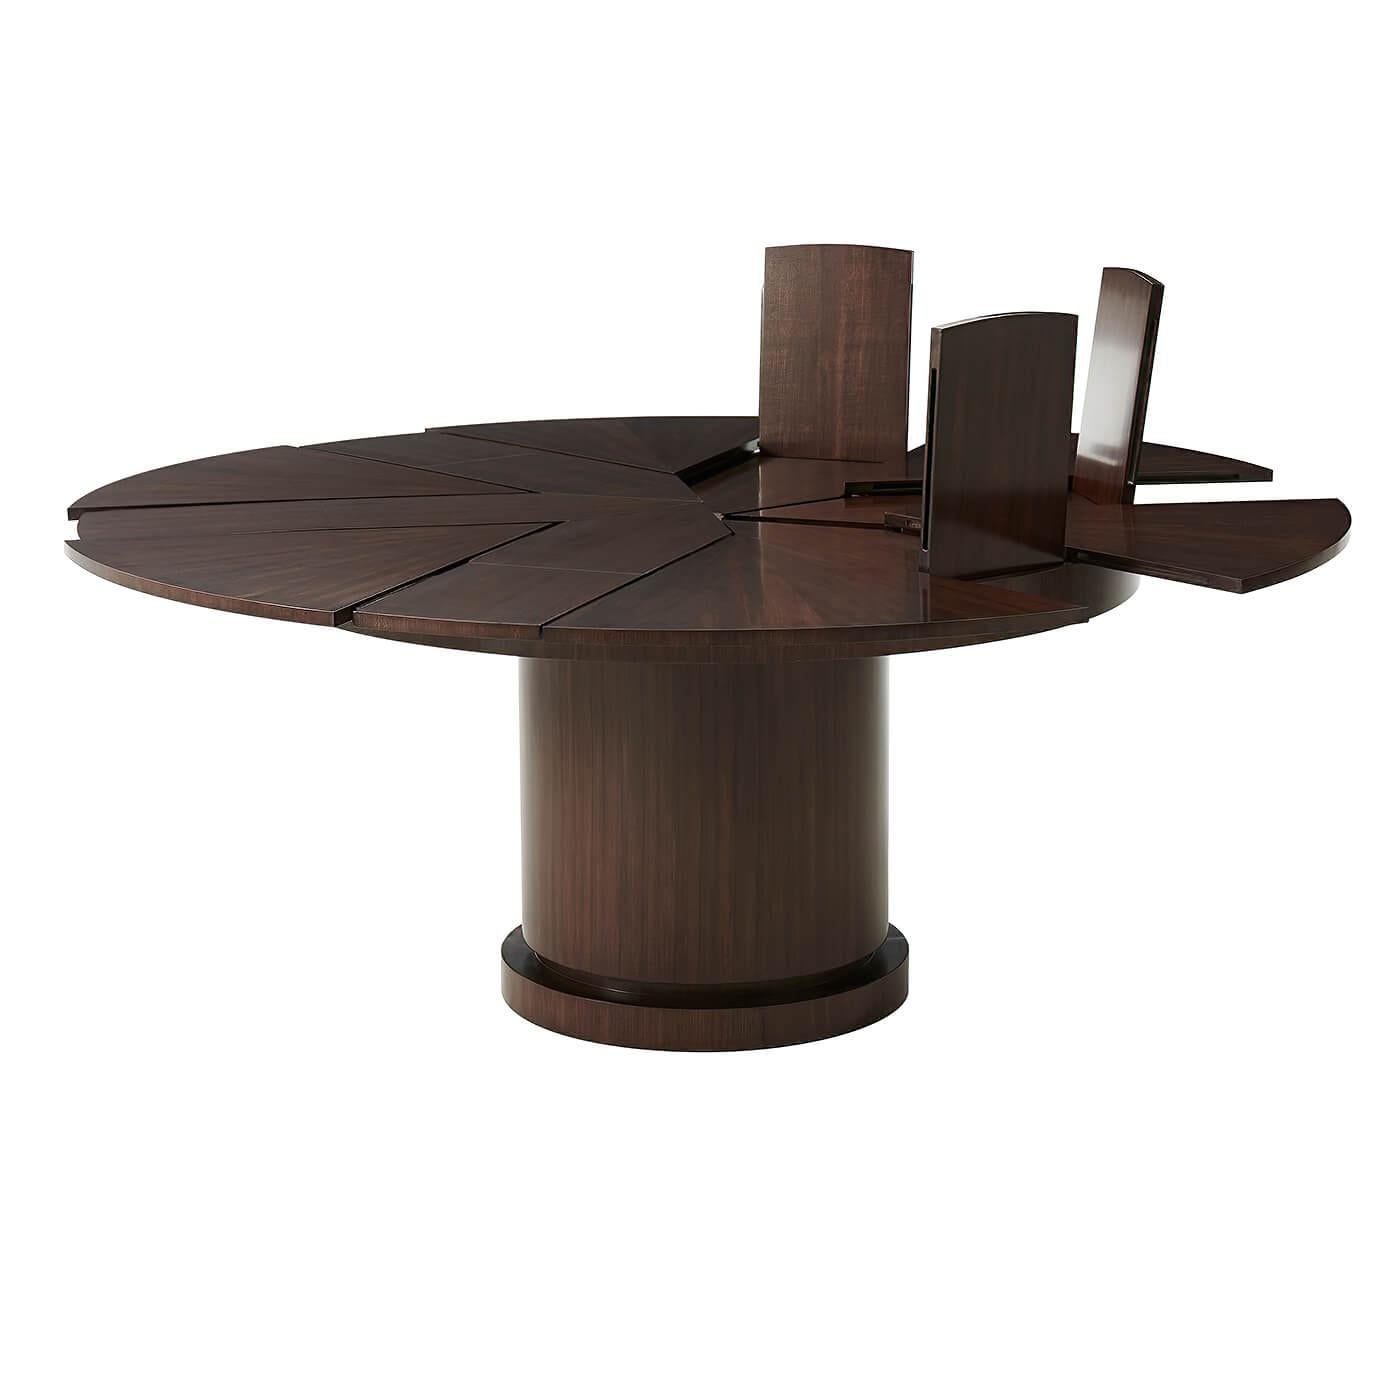 A Mid-Century Modern style round pacific walnut extension dining table with self-storing fold-out leaves on a bold cylindrical column pedestal base.

Dimensions:
Open: 72